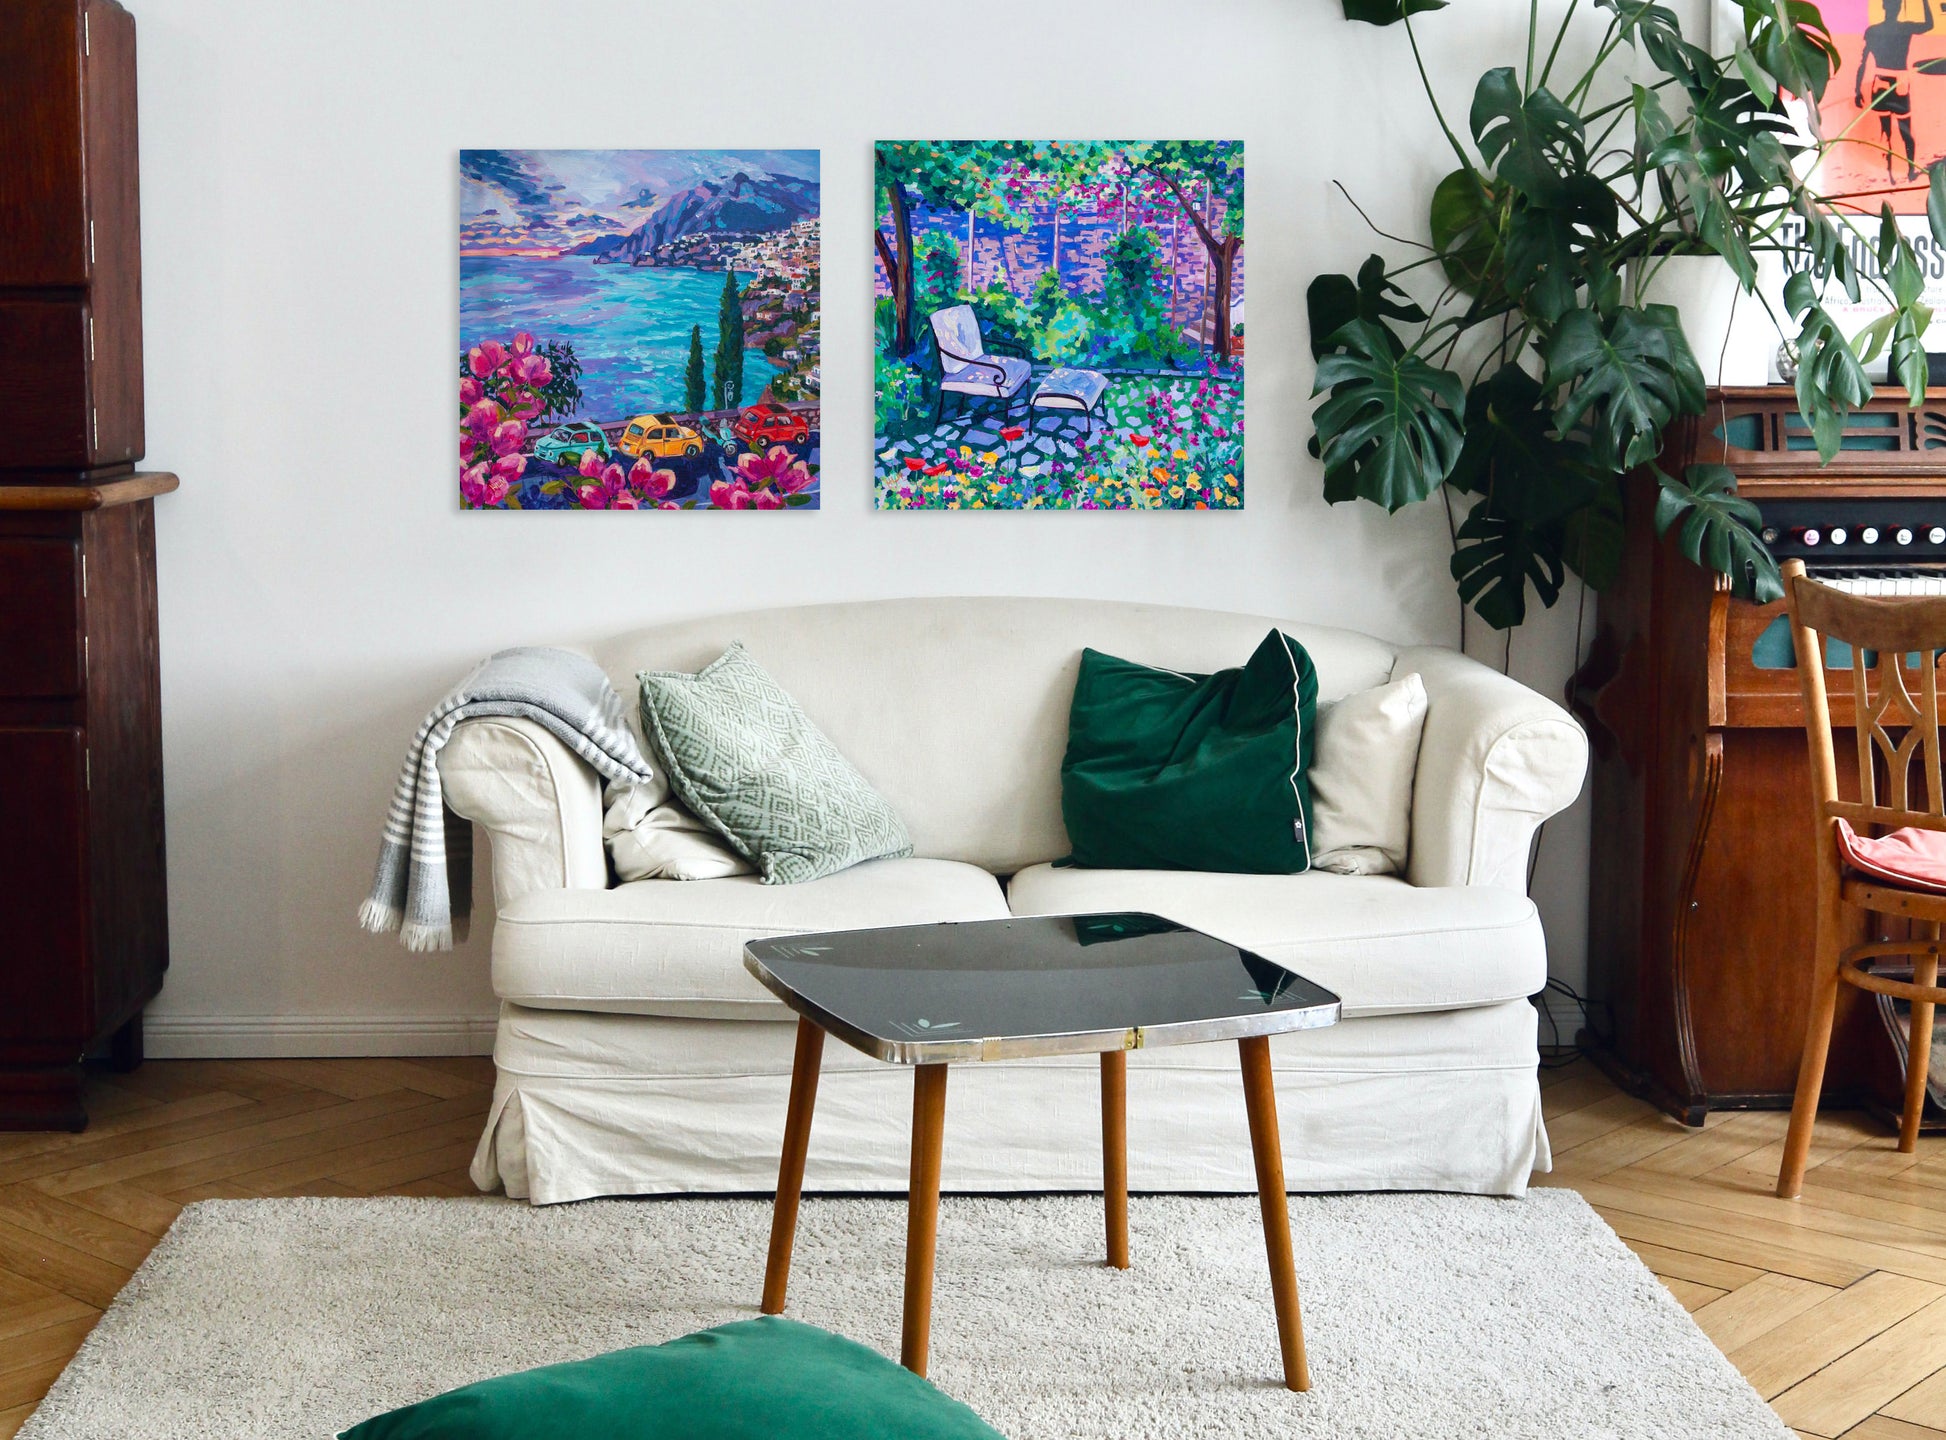 two italian paintings in a living room setting